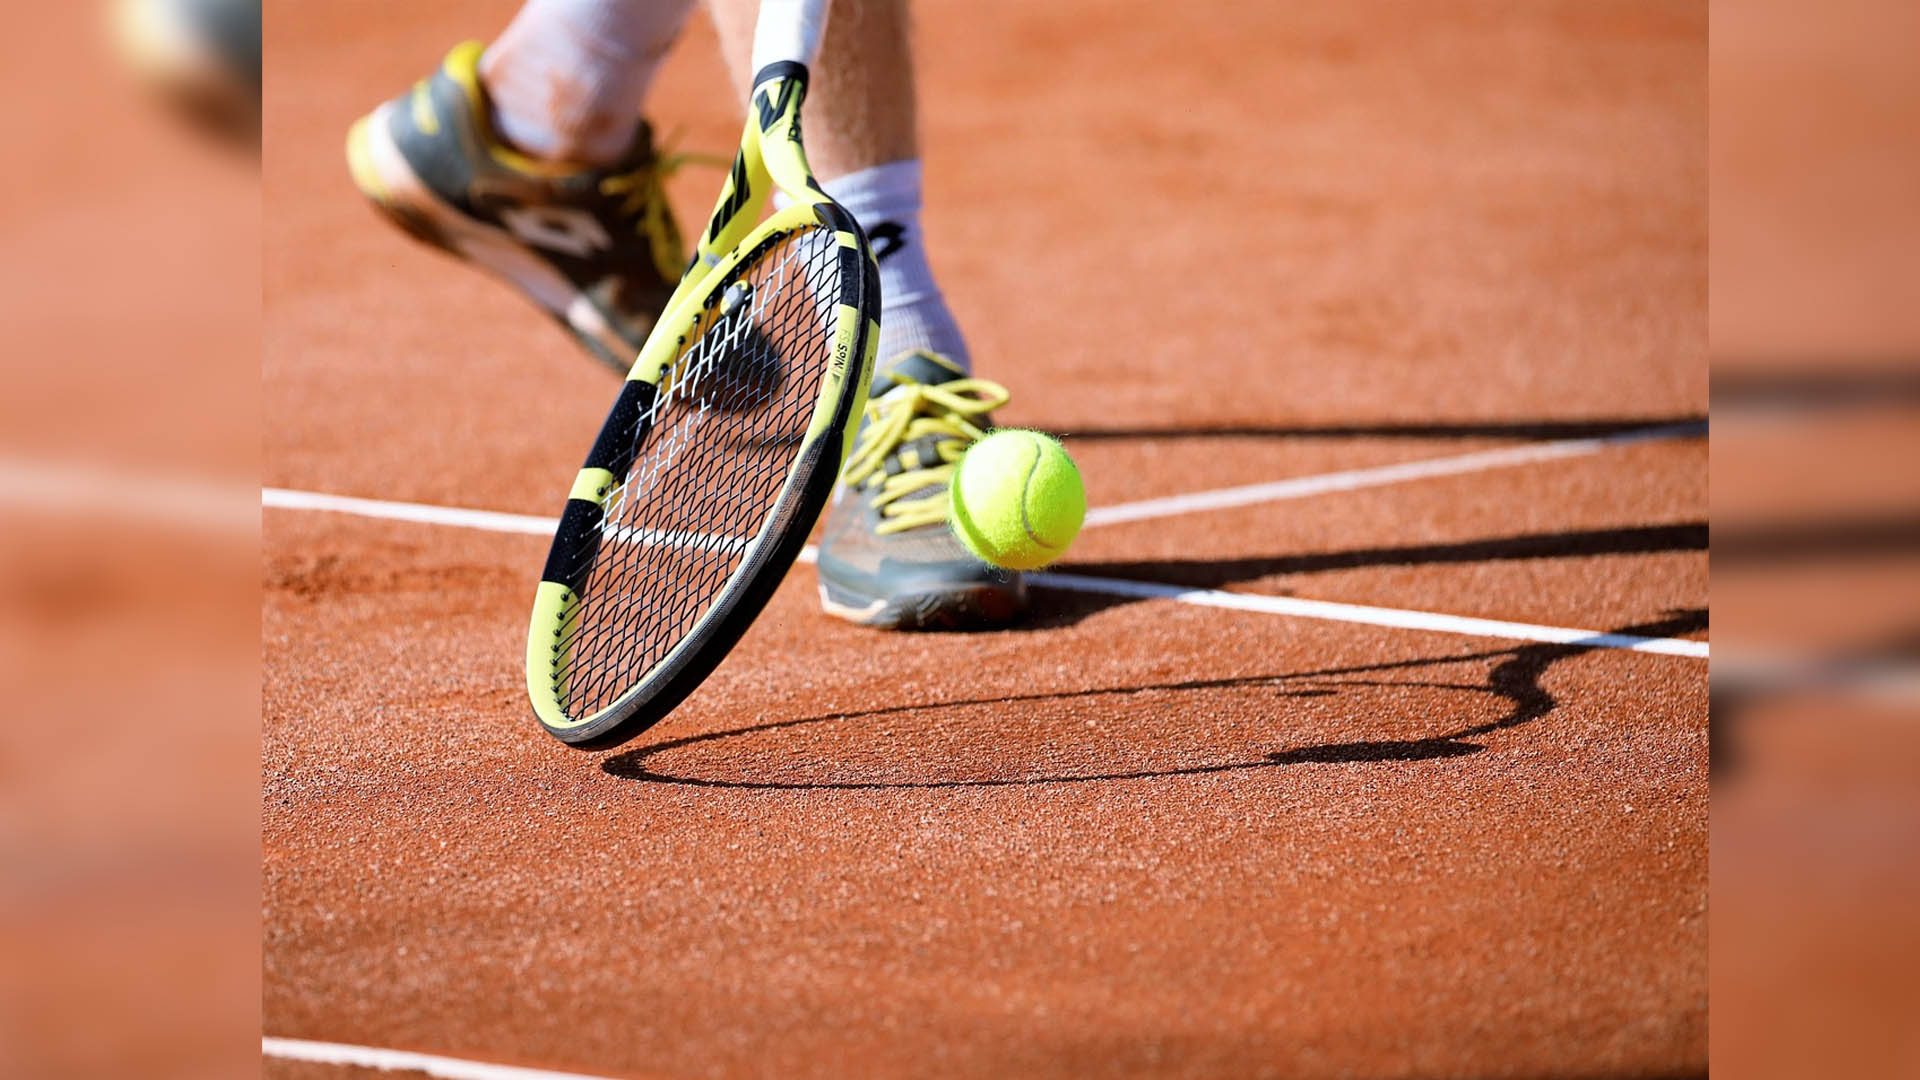 Sports News Roundup: Tennis-Halep falls to Badosa in return from doping ban as Sabalenka waits; Ice hockey-Former NHL player Koltsov dies in 'apparent suicide', Miami-Dade police say and more